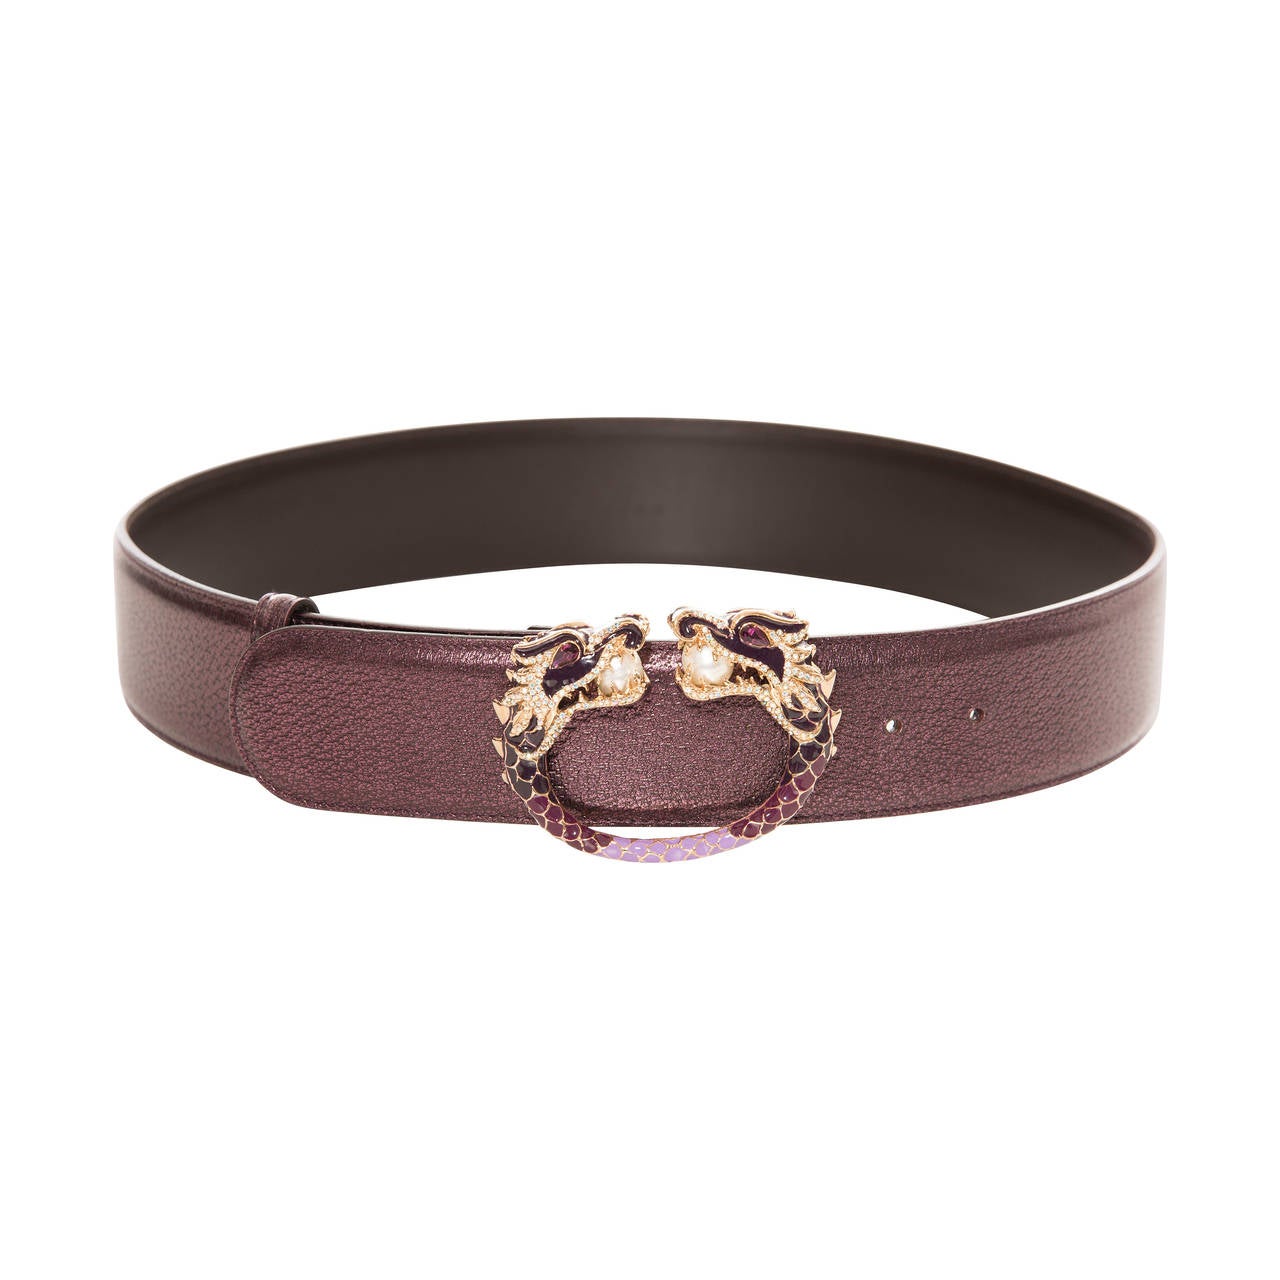 Tom Ford for Gucci Metallic Leather Belt With Dragon Buckle, Circa 1990's